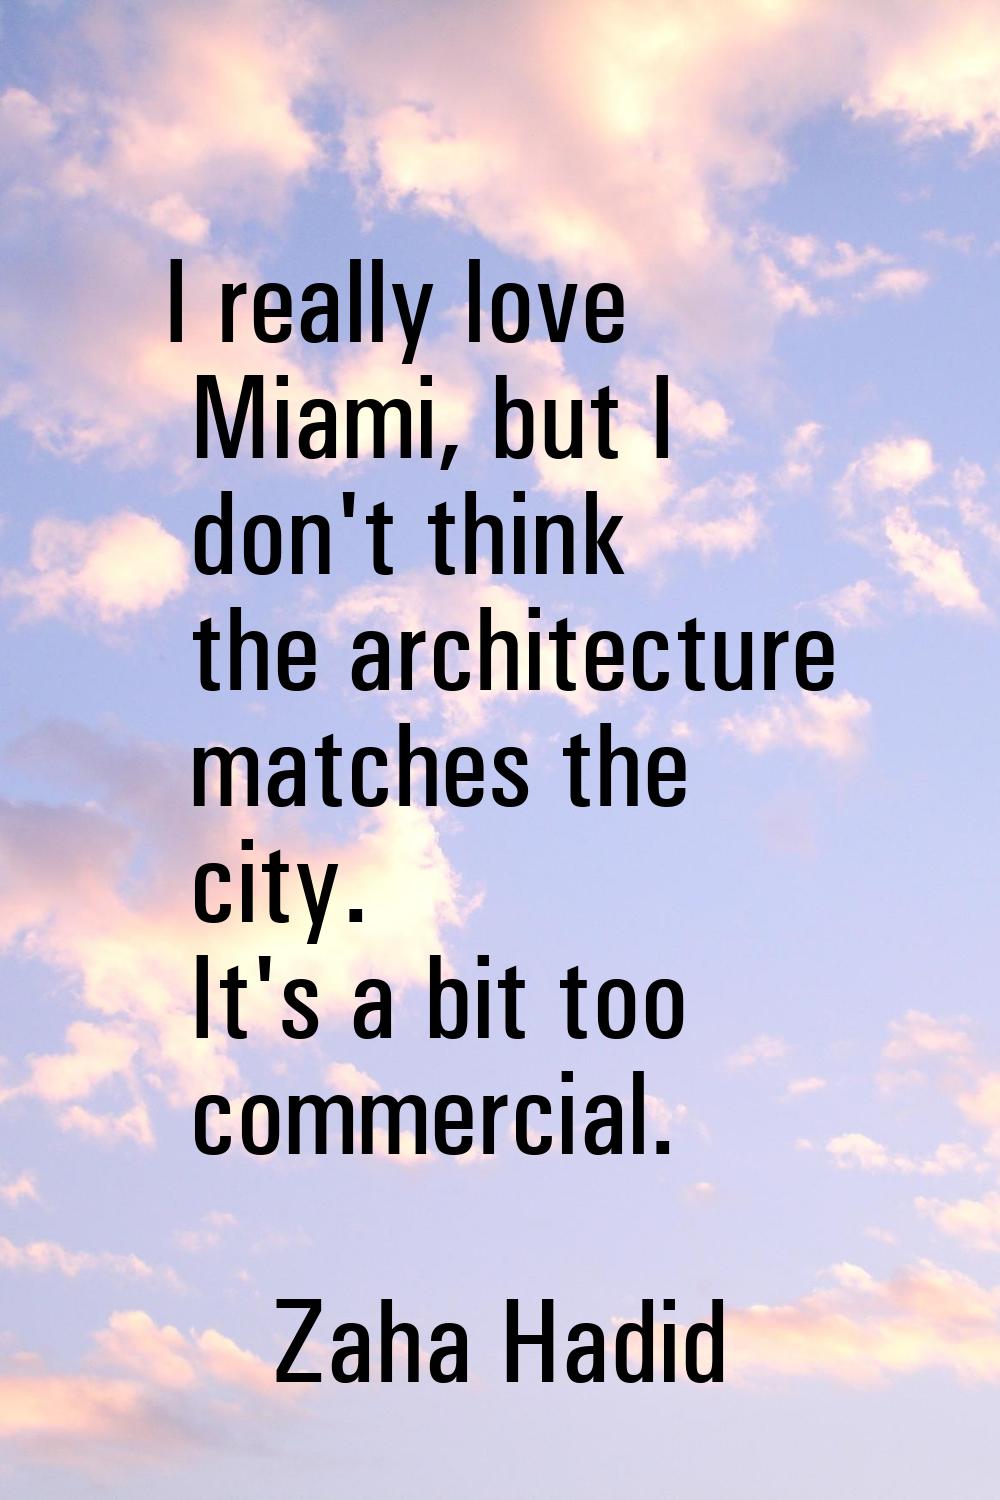 I really love Miami, but I don't think the architecture matches the city. It's a bit too commercial